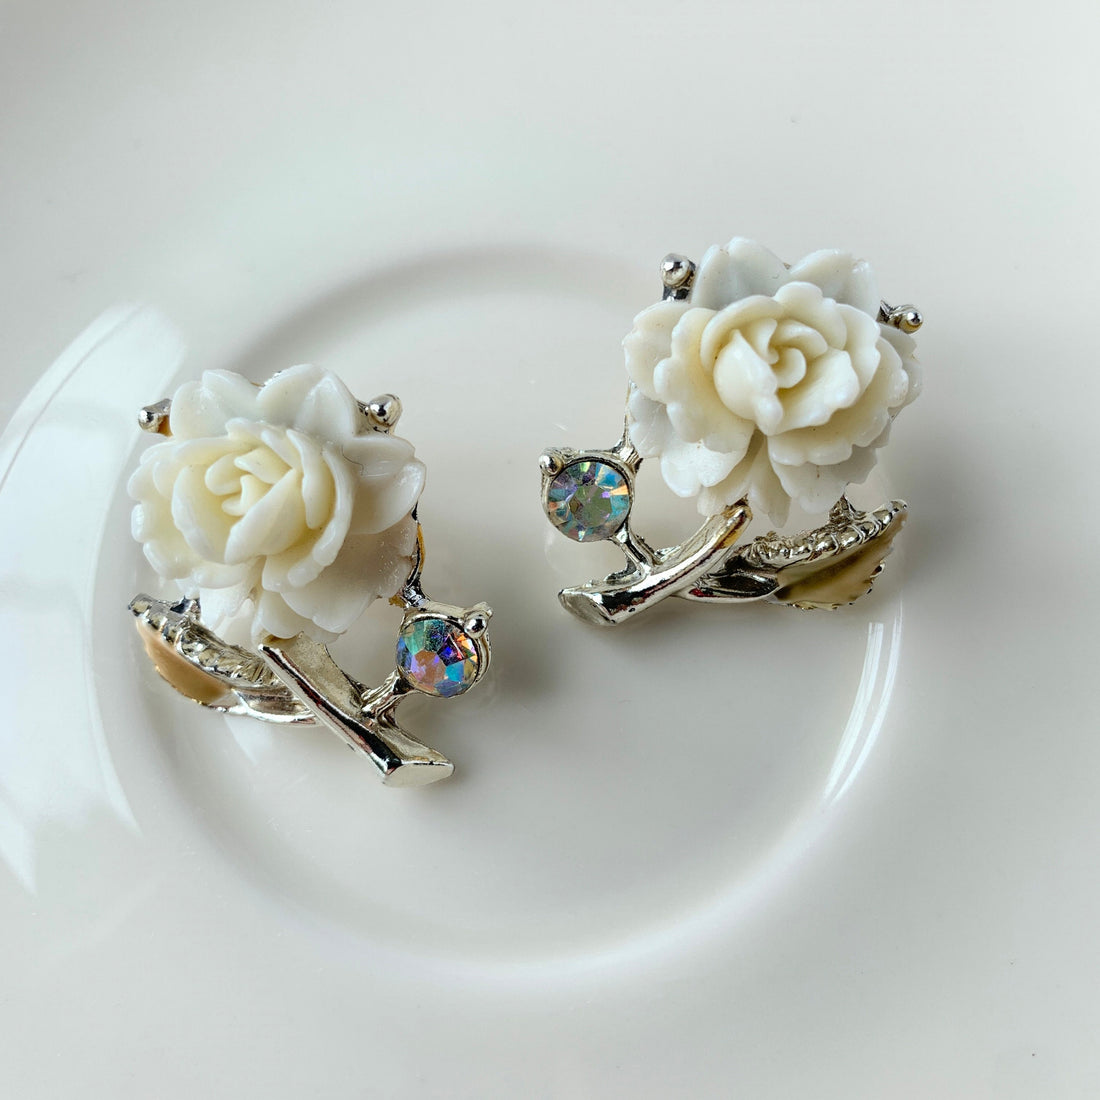 Lenora Dame Vintage Rose Post Earrings - One-of-a-Kind